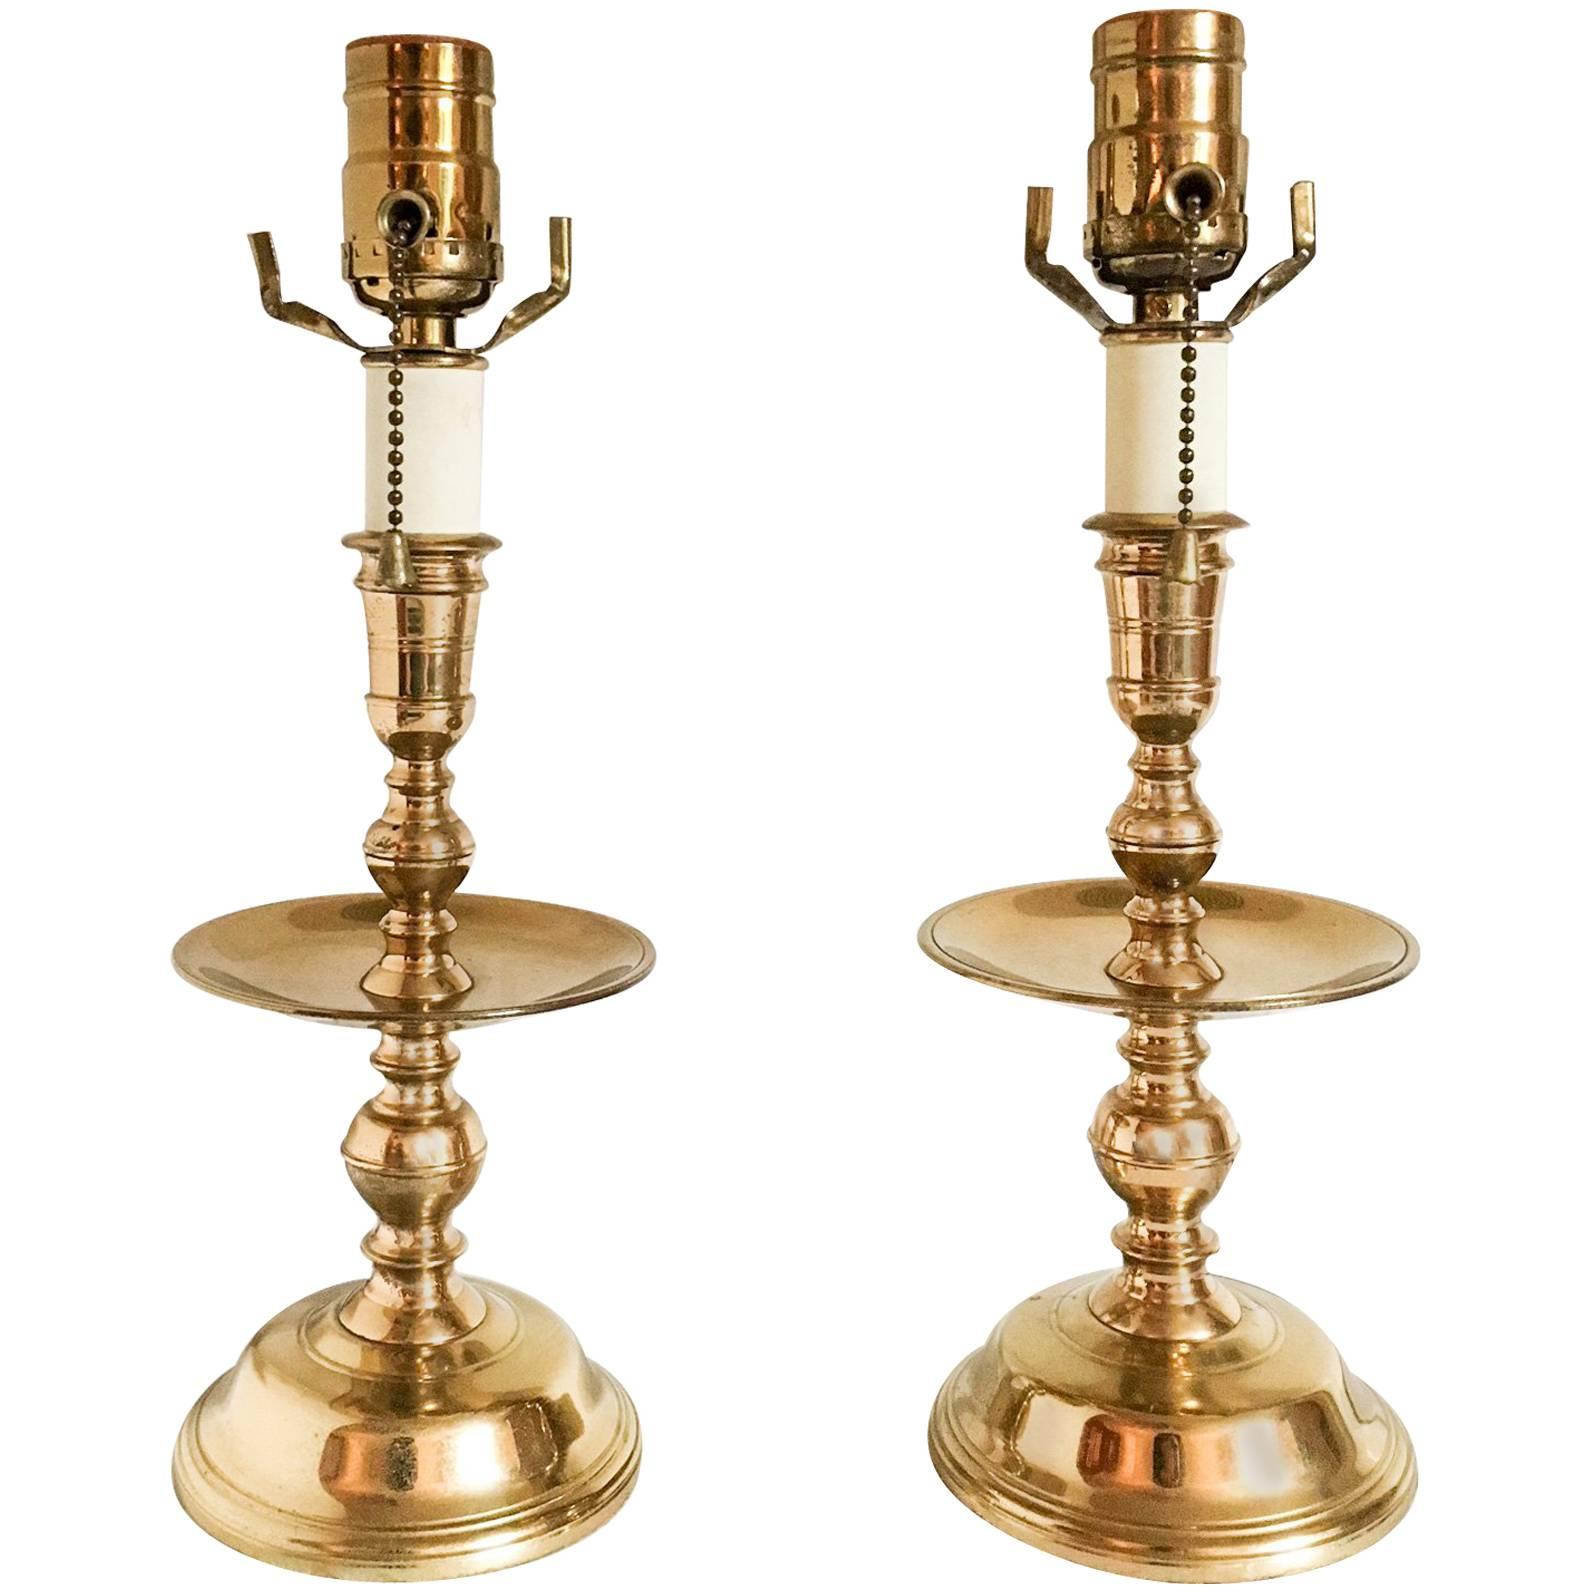 Virginia Metalcrafters Brass Candlestick Accent Lamps, Pair